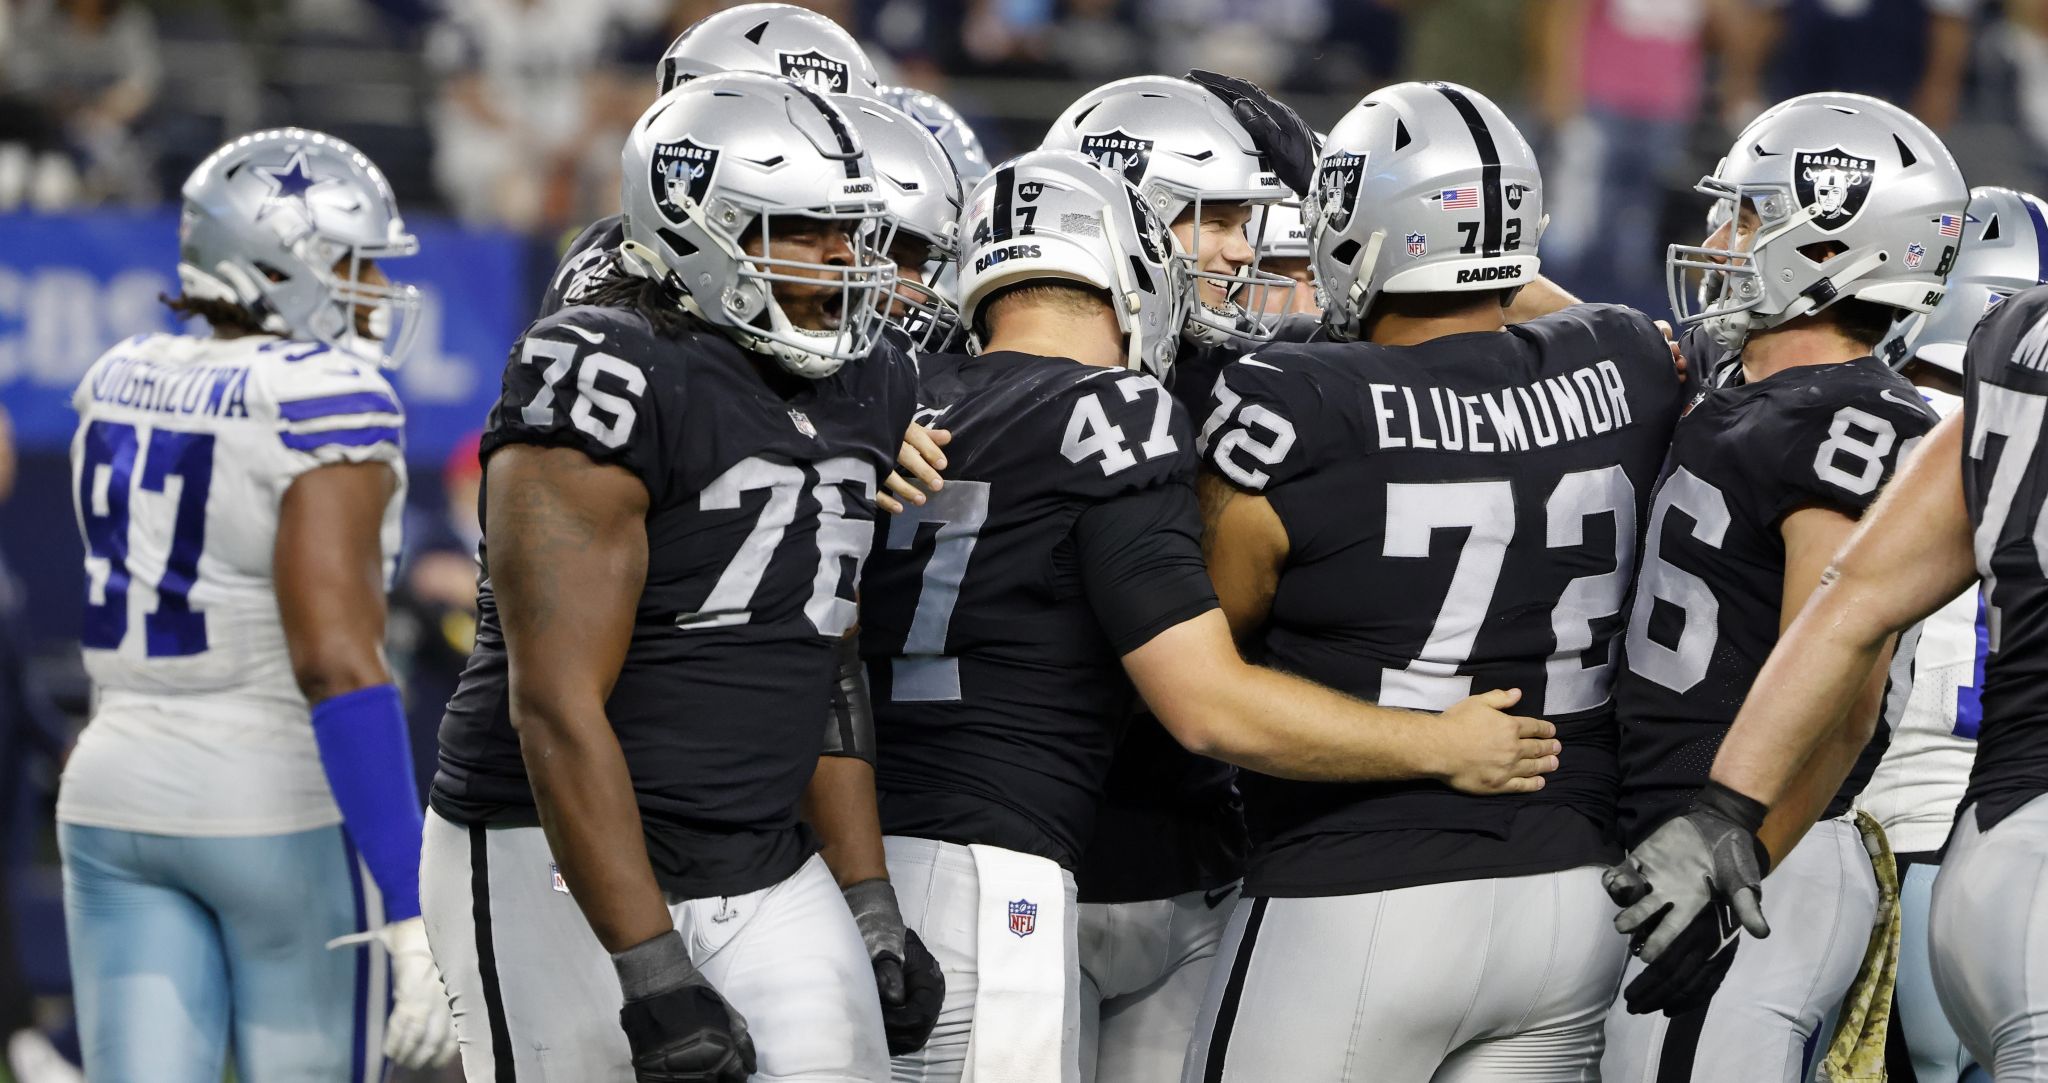 Raiders beat Cowboys in OT on field goal after penalty